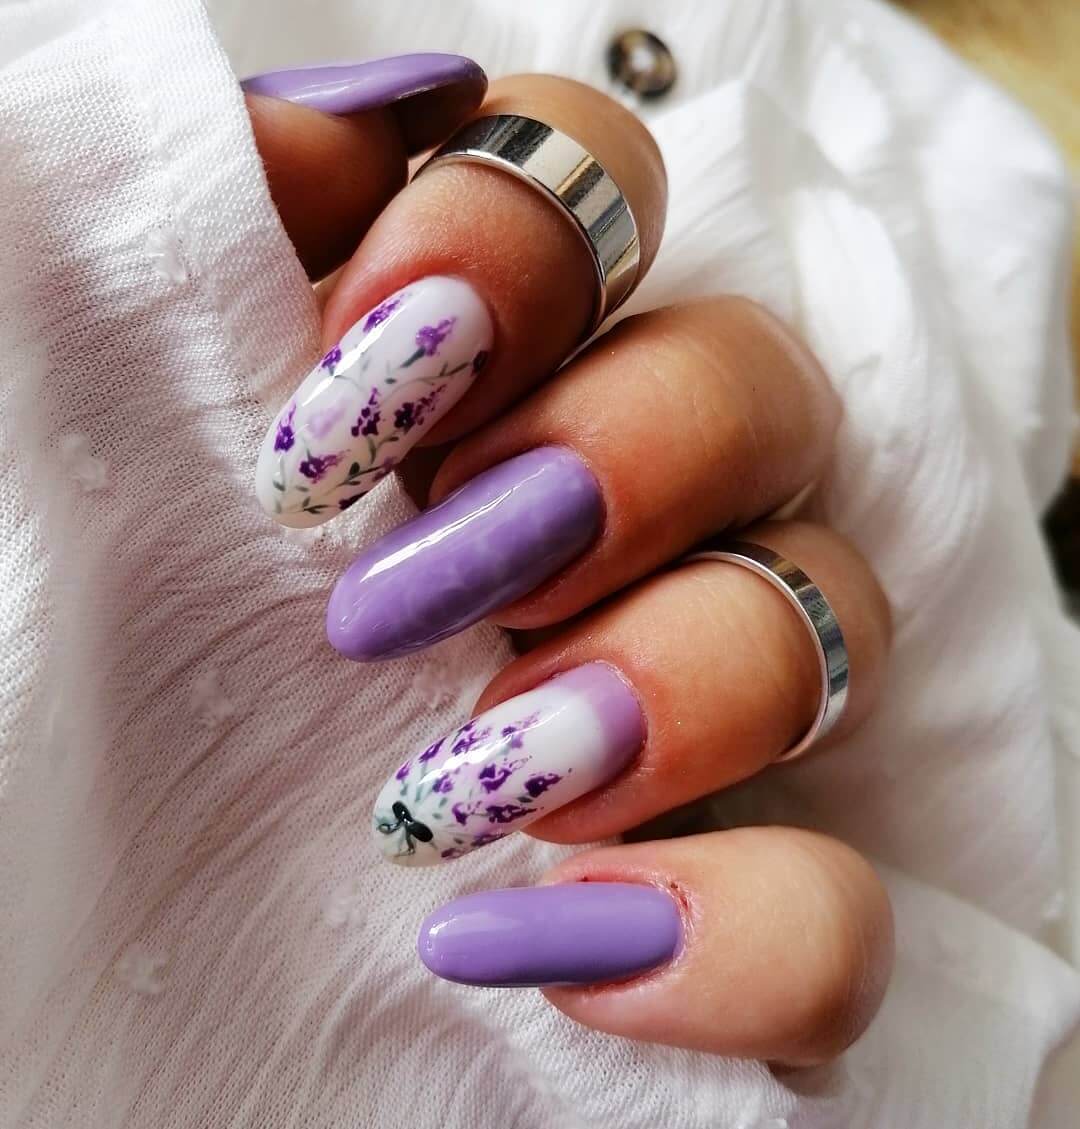 It's some lavender beauty Summer Nail Art Designs 